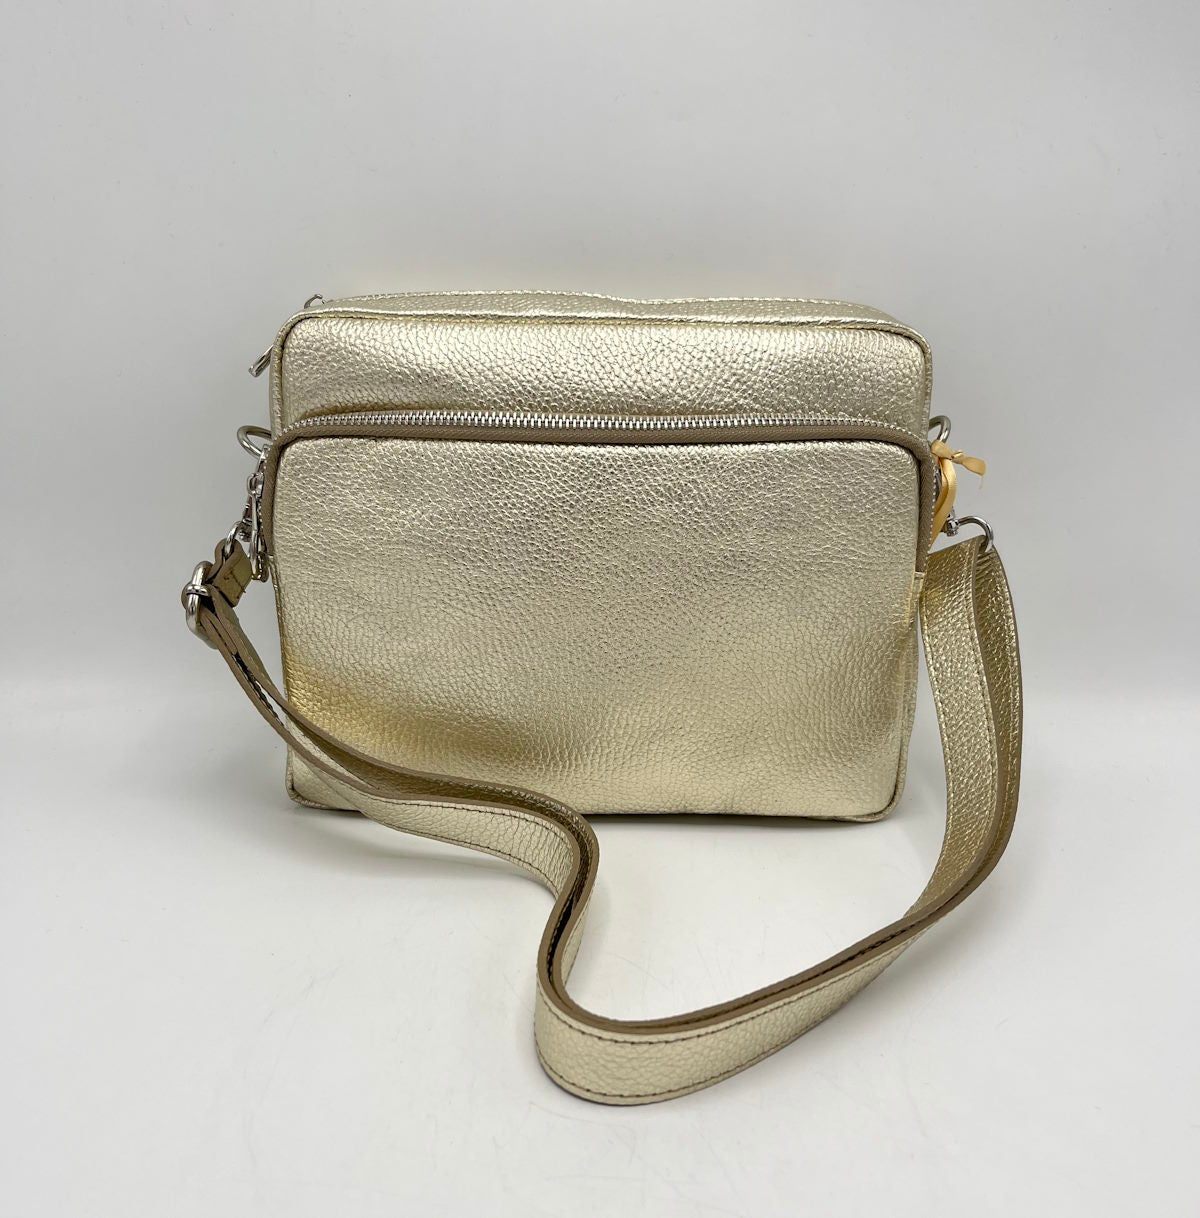 Genuine leather shoulder bag, for women, made in Italy, art. 112425